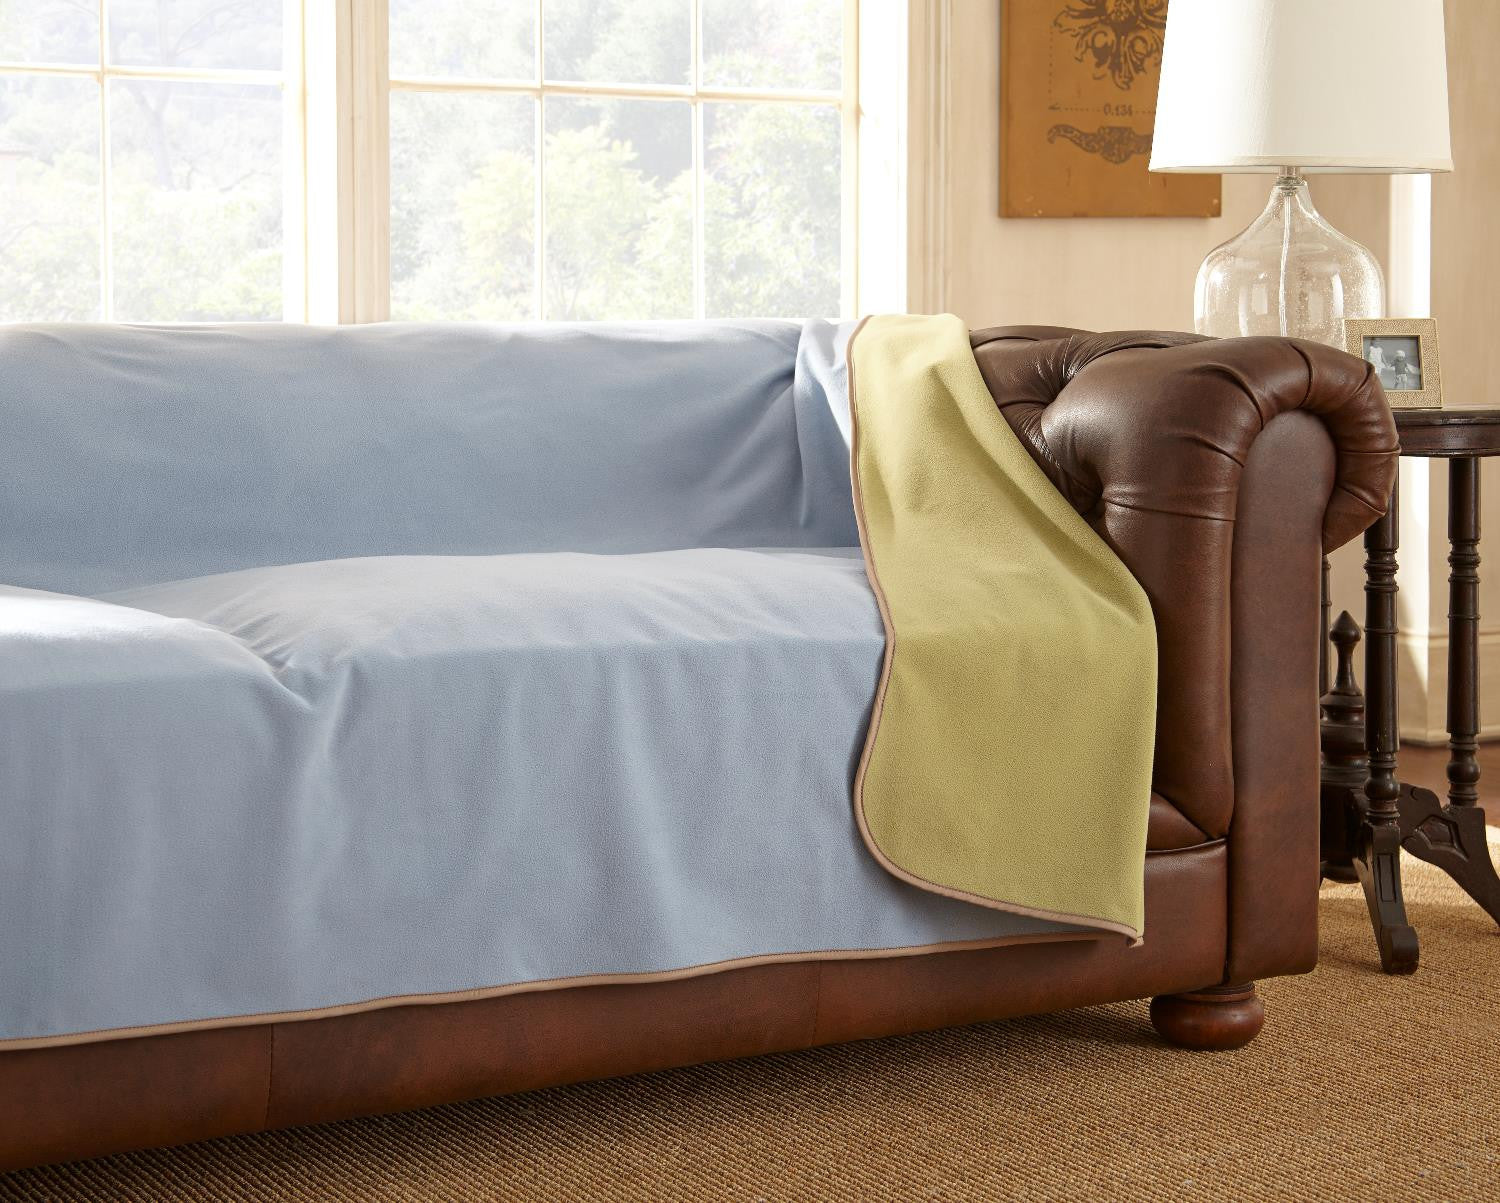 Clearance - Furniture Cover Bamboo/Sky Blue